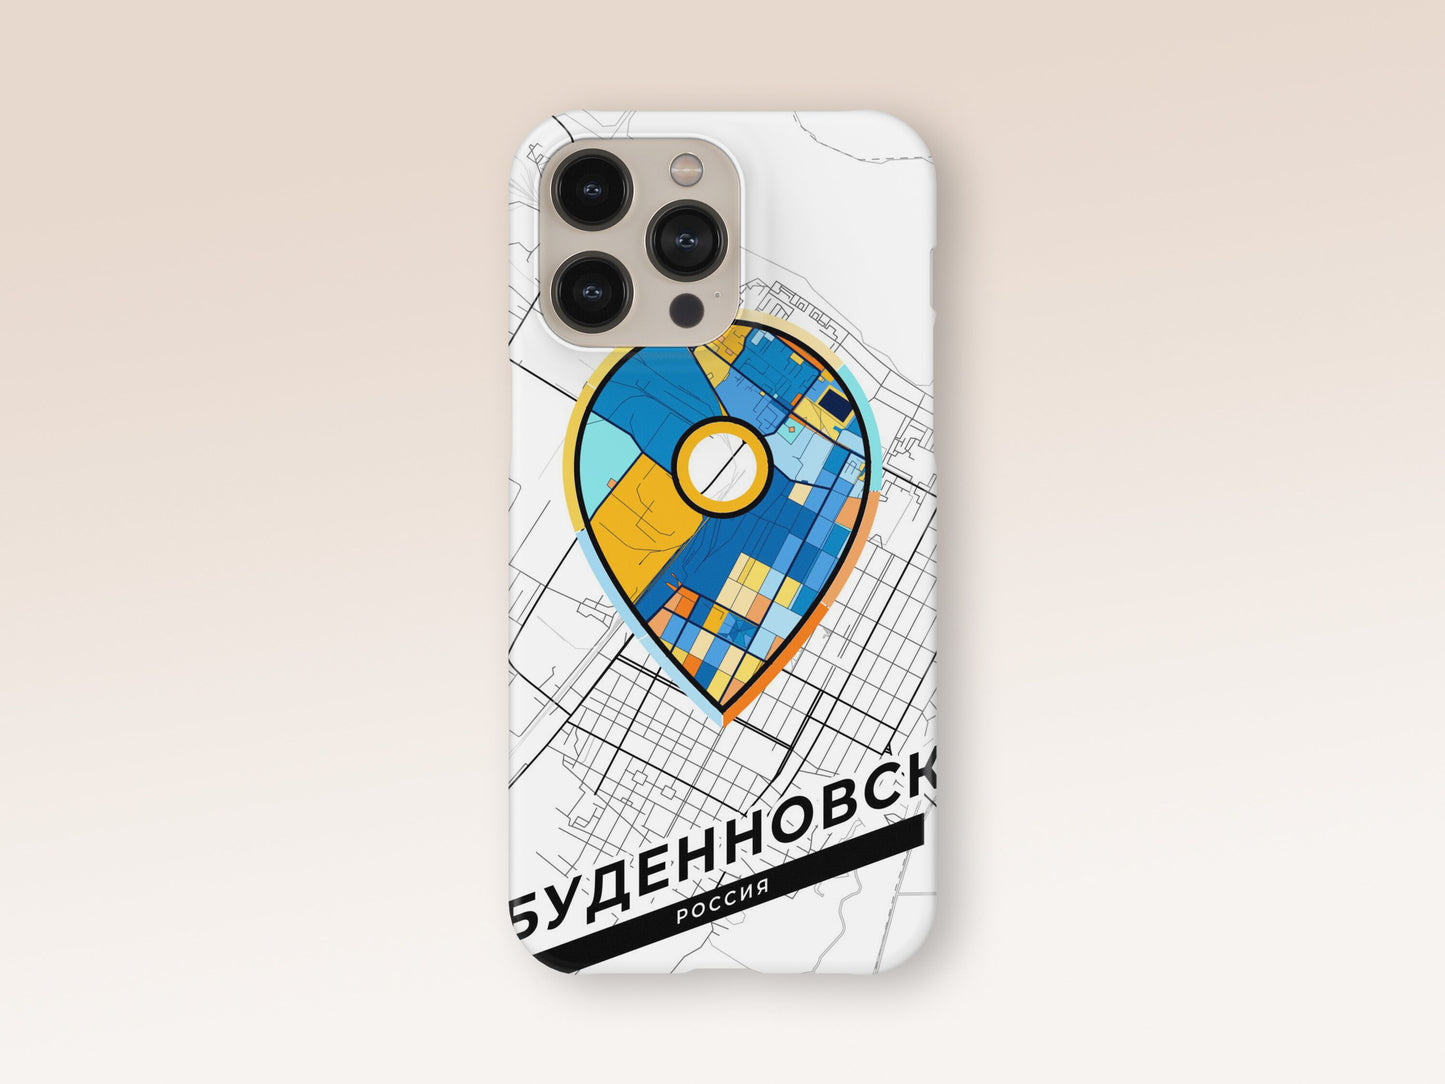 Budyonnovsk Russia slim phone case with colorful icon. Birthday, wedding or housewarming gift. Couple match cases. 1